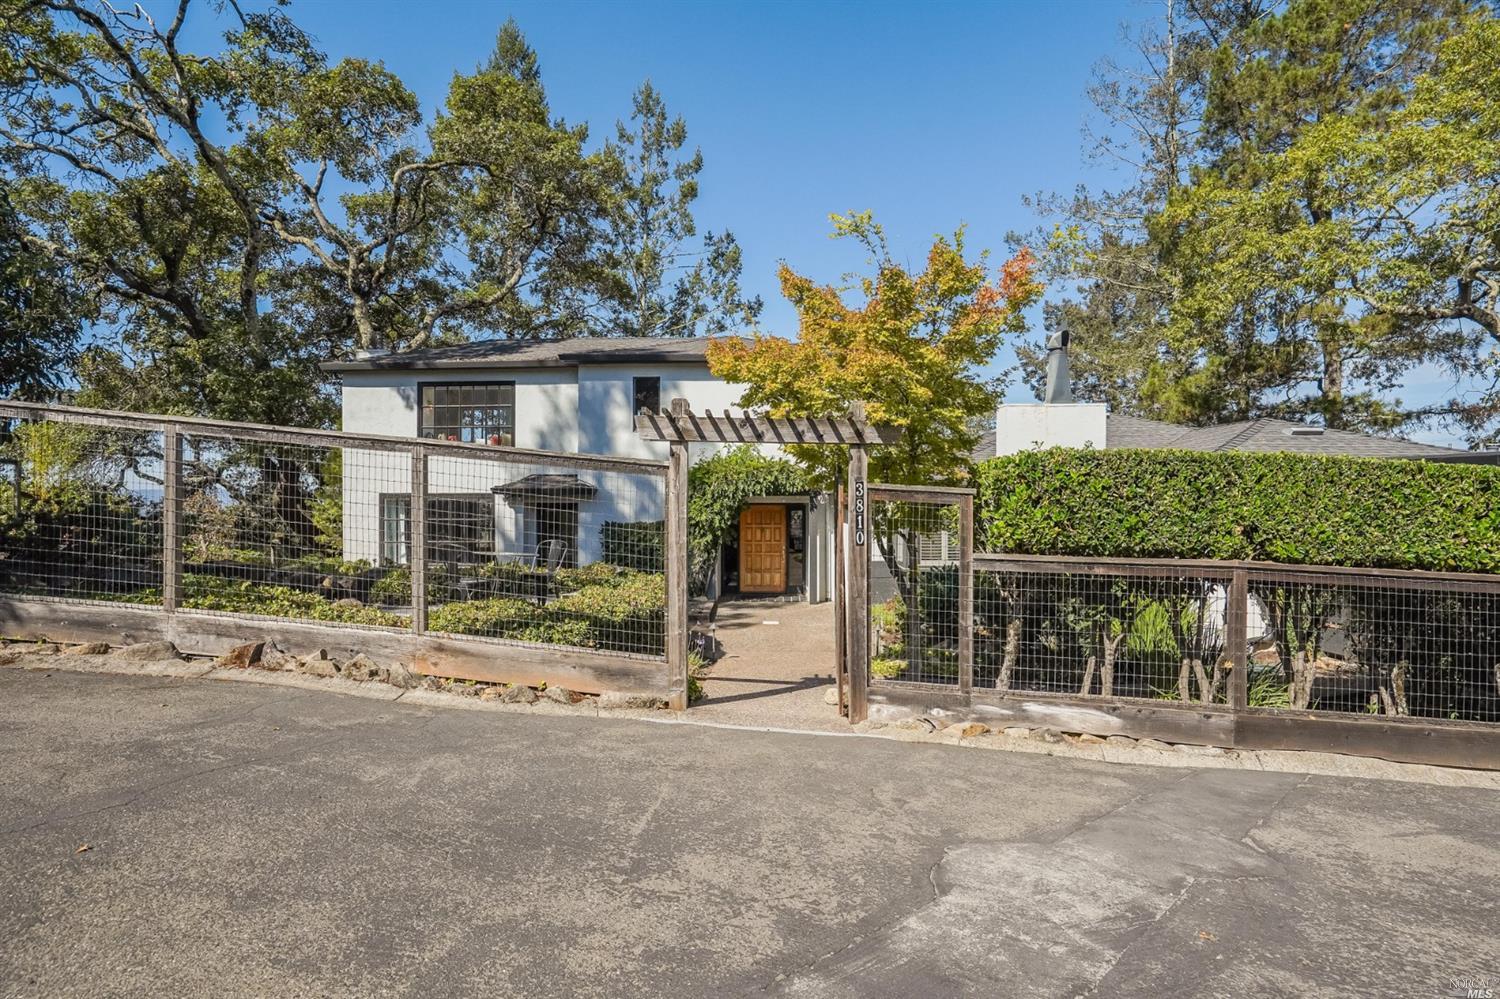 Welcome to 3810 Zieber Rd, nestled in the heart of Montecito Hills